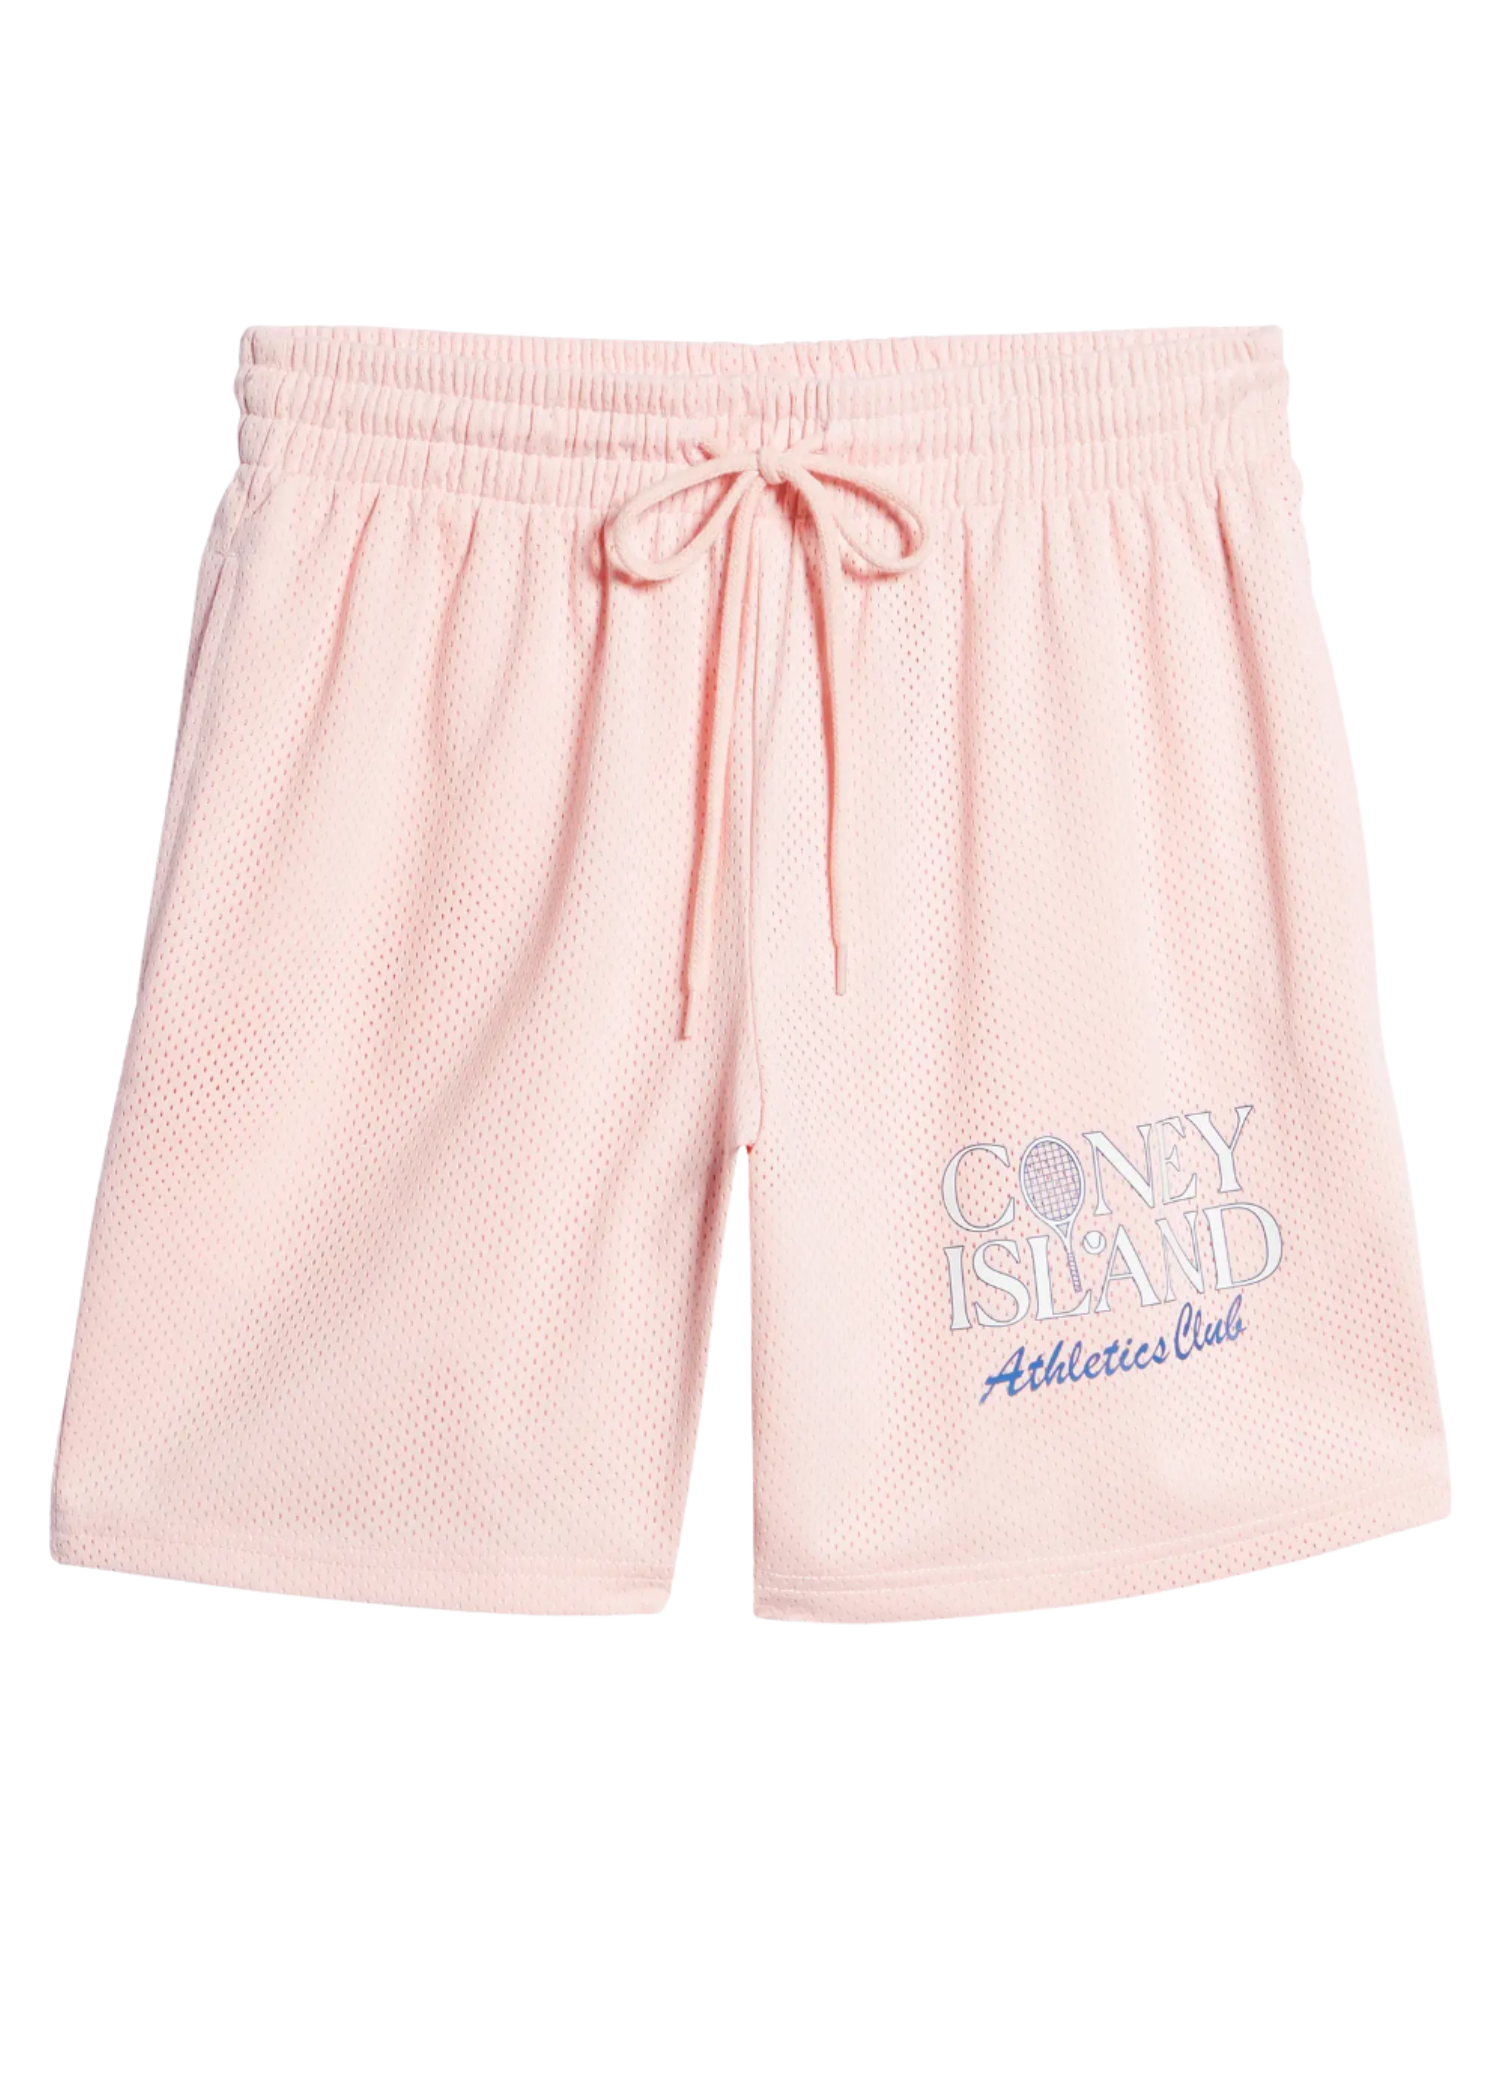 Coney Island Picnic Graphic Mesh Short  Urban Outfitters Japan - Clothing,  Music, Home & Accessories